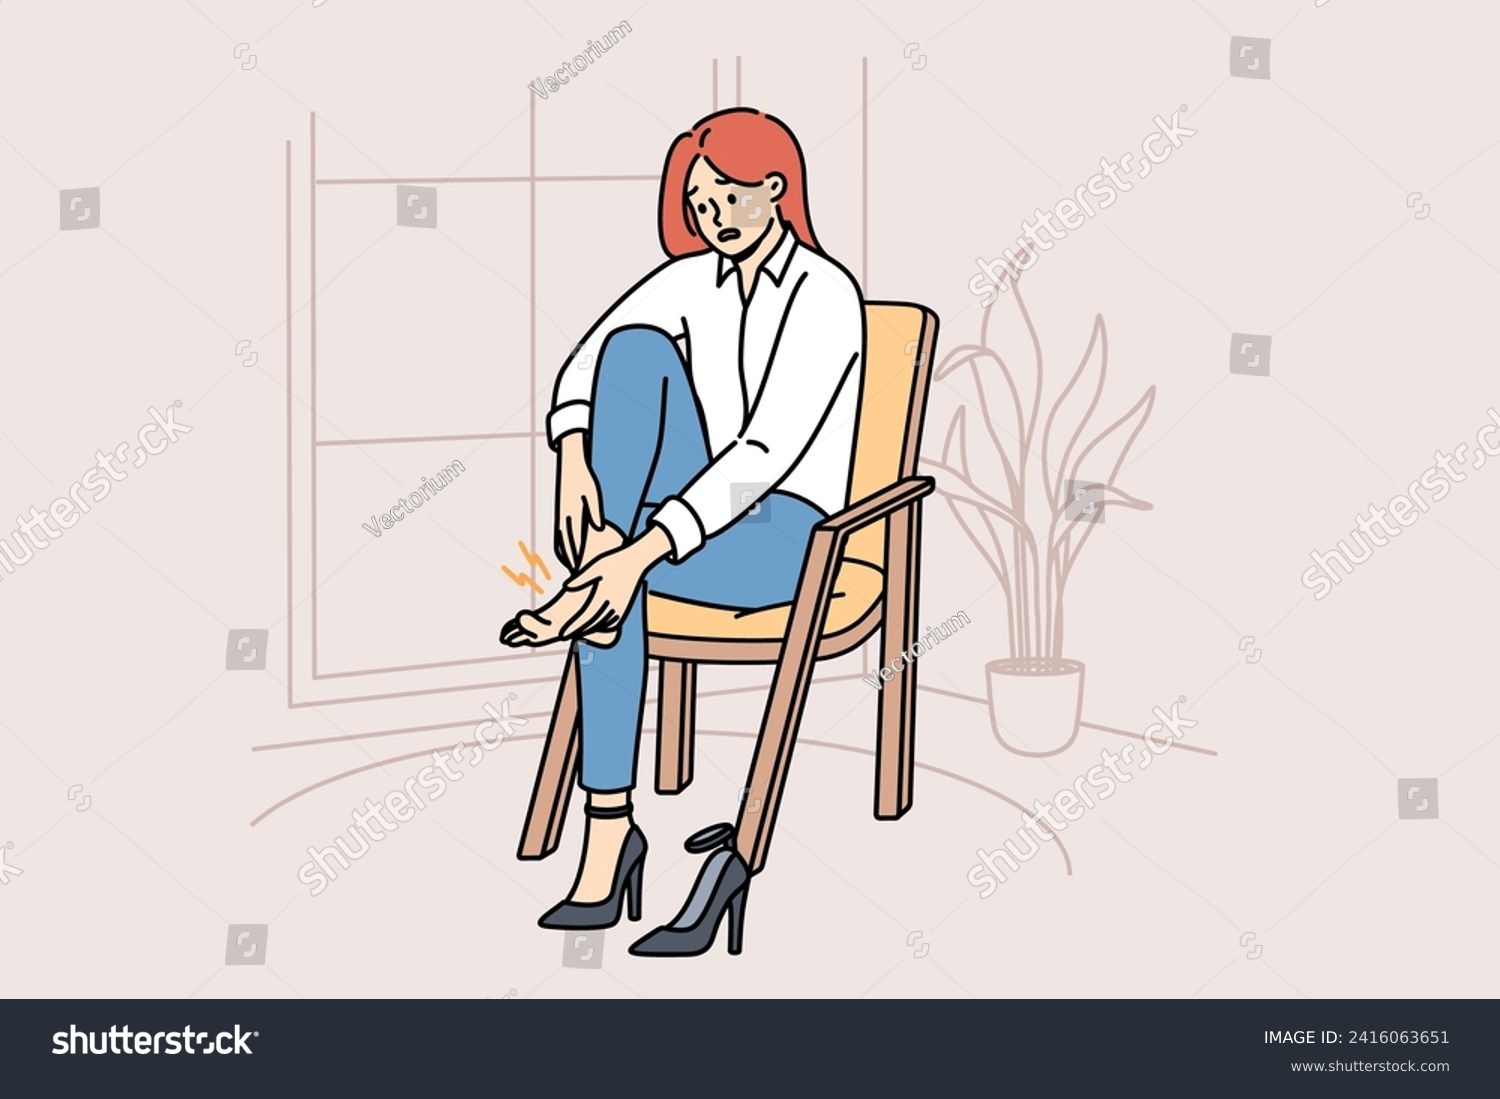 Woman with varicose veins feels pain in legs due to uncomfortable high-heeled shoes, sits on chair in apartment. Girl needs medicinal ointment to cure varicose veins or calluses on heel #2416063651